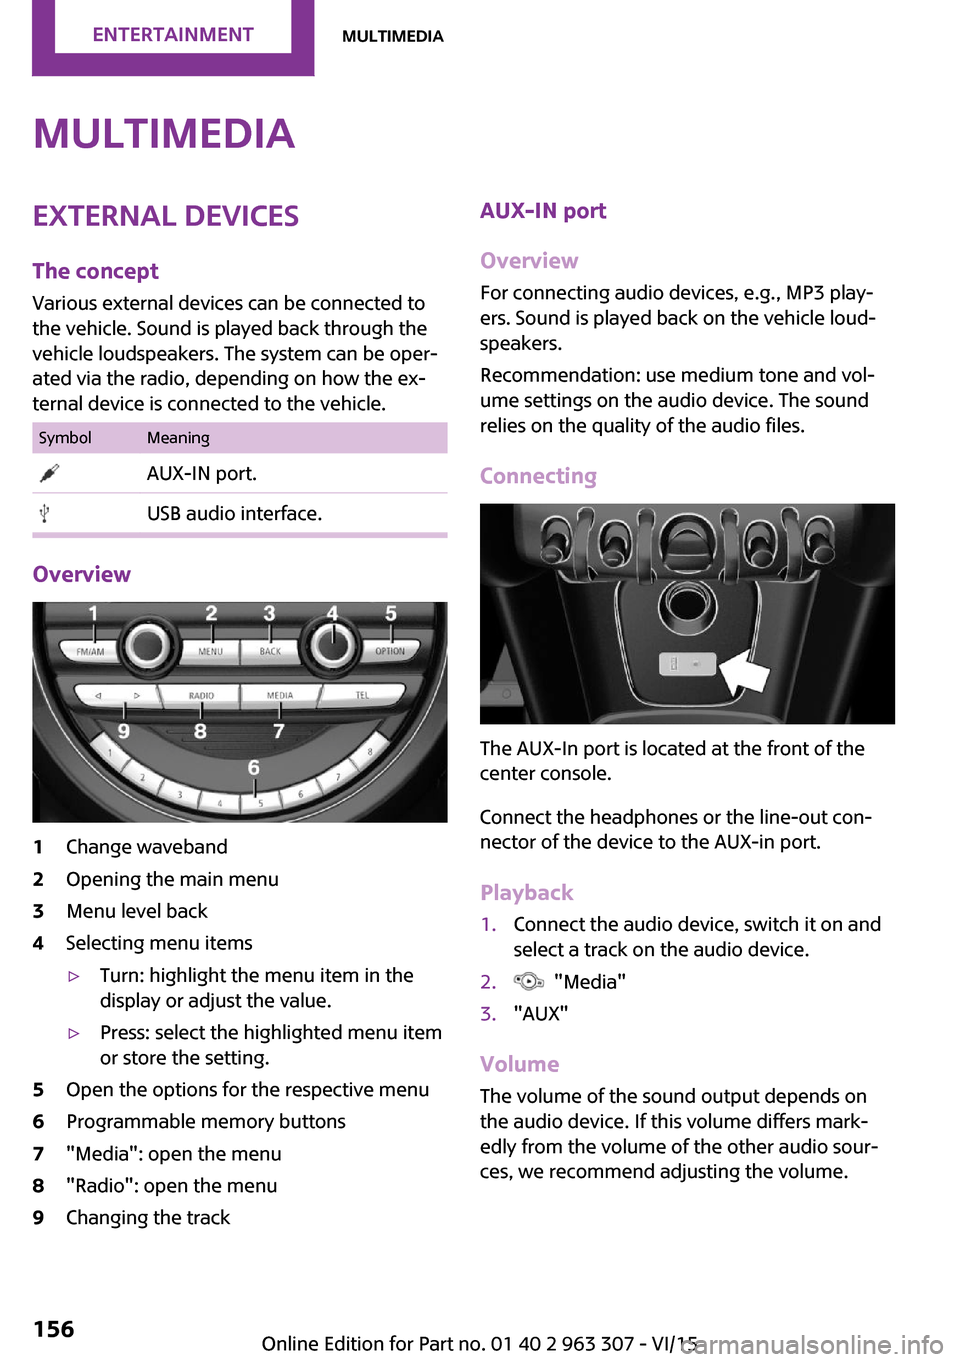 MINI Hardtop 4 Door 2016  Owners Manual MultimediaExternal devices
The concept Various external devices can be connected to
the vehicle. Sound is played back through the
vehicle loudspeakers. The system can be oper‐
ated via the radio, de